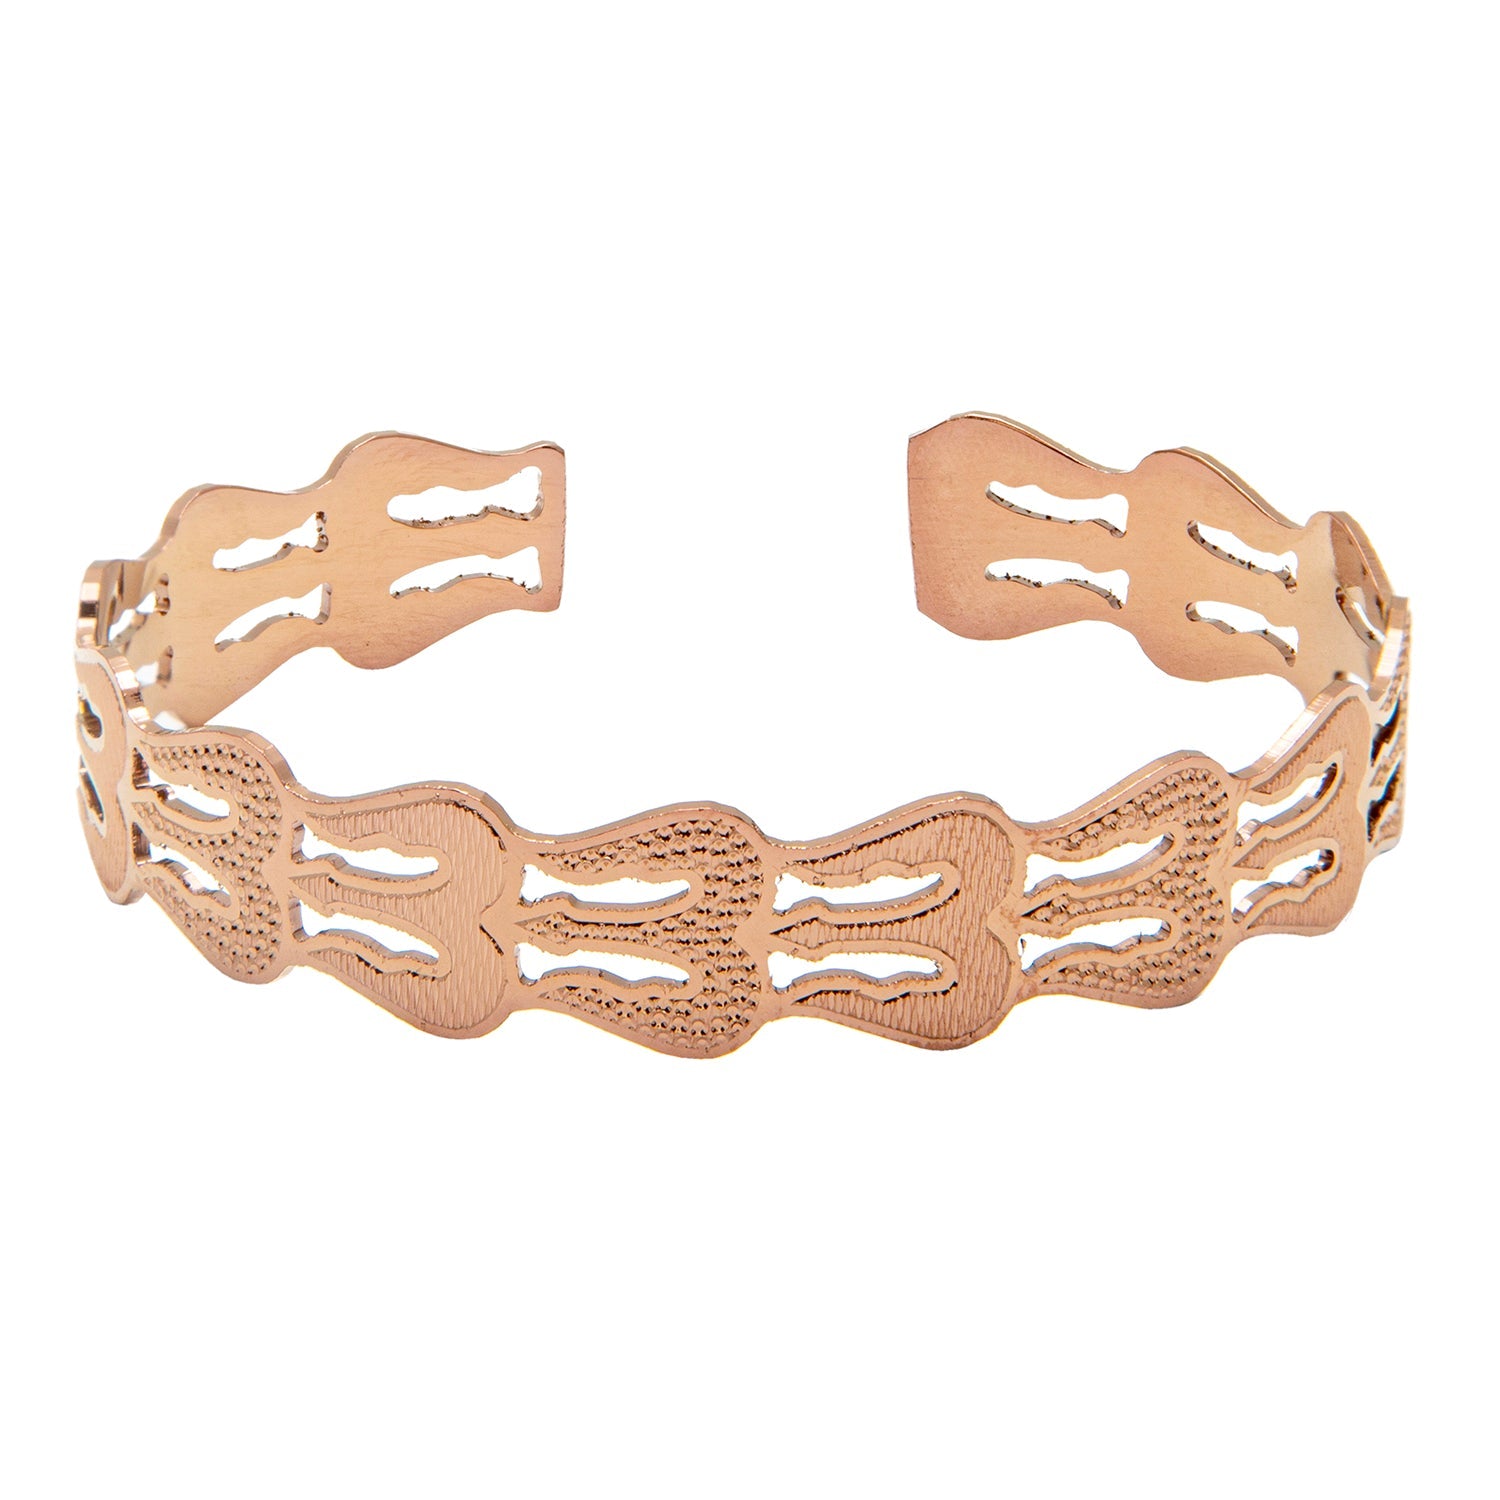 Buy INDIAN ART VILLA Pure Copper Round Jointless Kada Bracelet with Diamond  Design and Shine Finish - Health and Fashion Accessory for Men and Women,  Diameter - 3.2 inch at Amazon.in